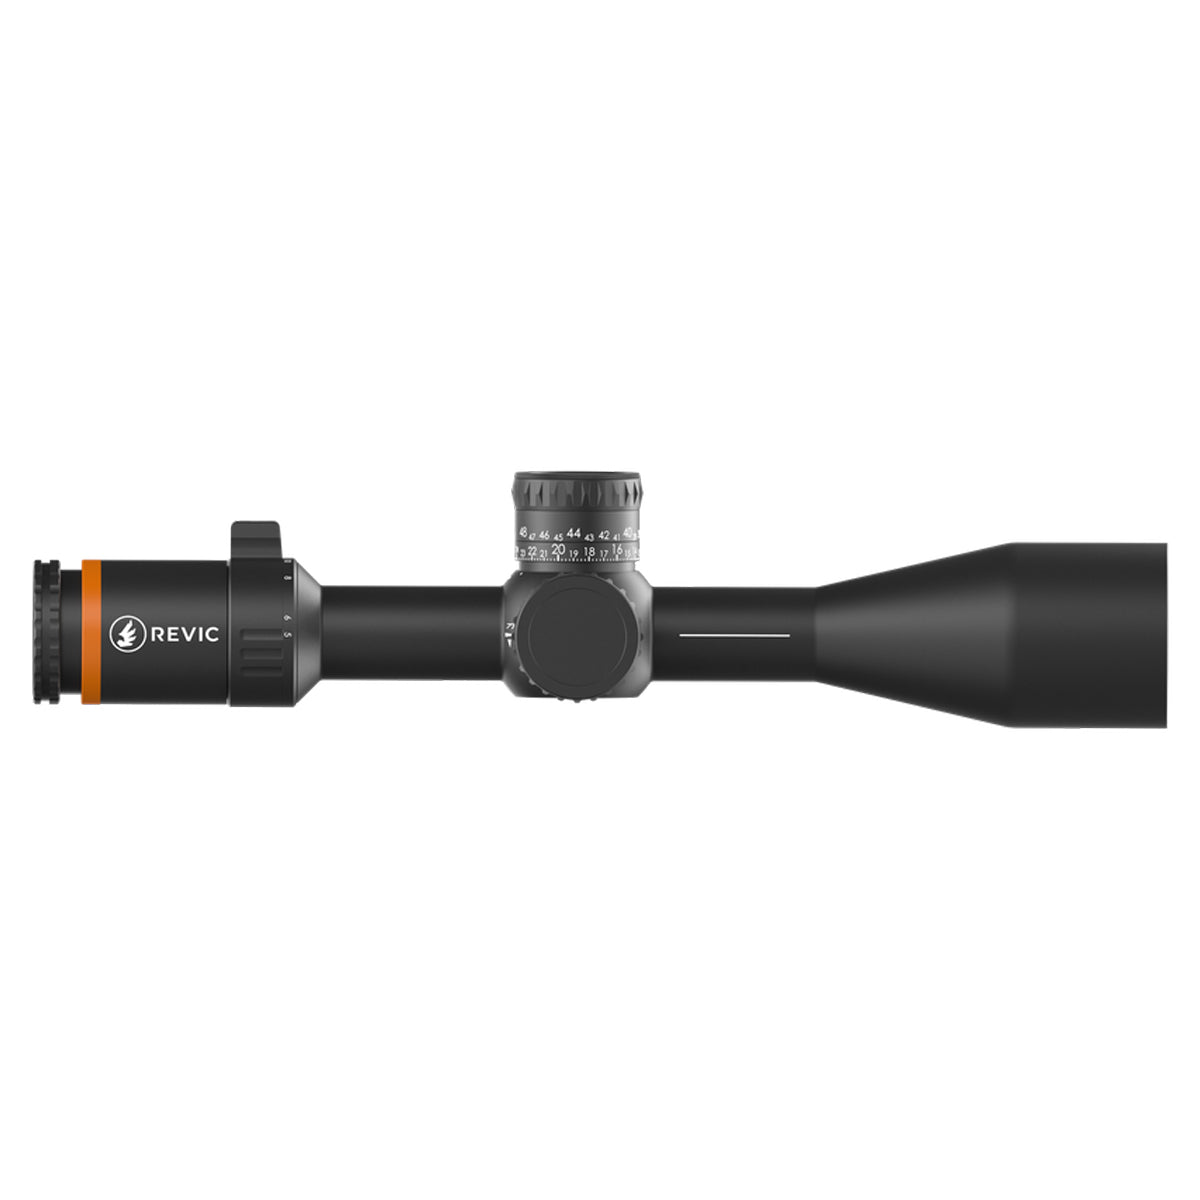 Gunwerks Revic Acura RS25i 5-25x50 Illuminated Riflescope in  by GOHUNT | Revic - GOHUNT Shop